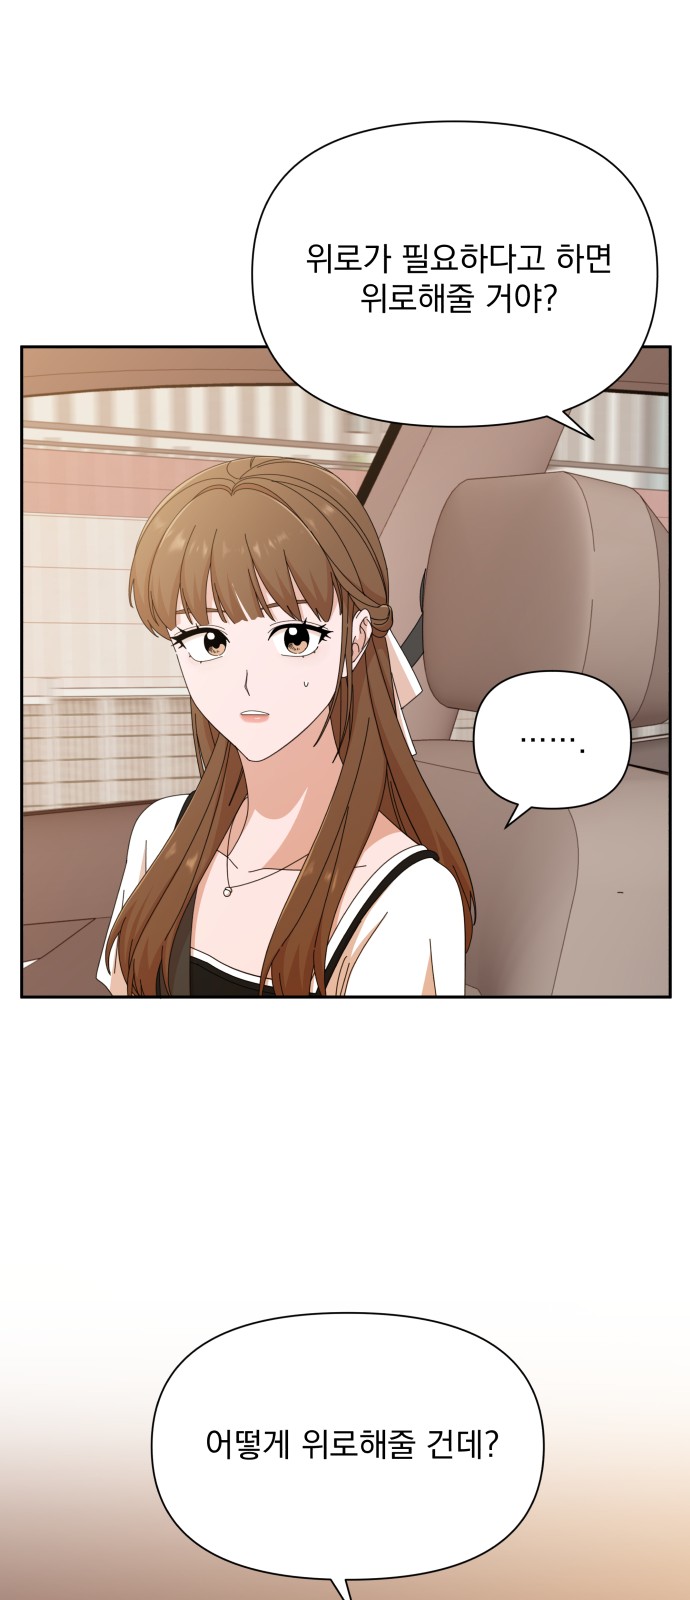 The Man With Pretty Lips - Chapter 36 - Page 66